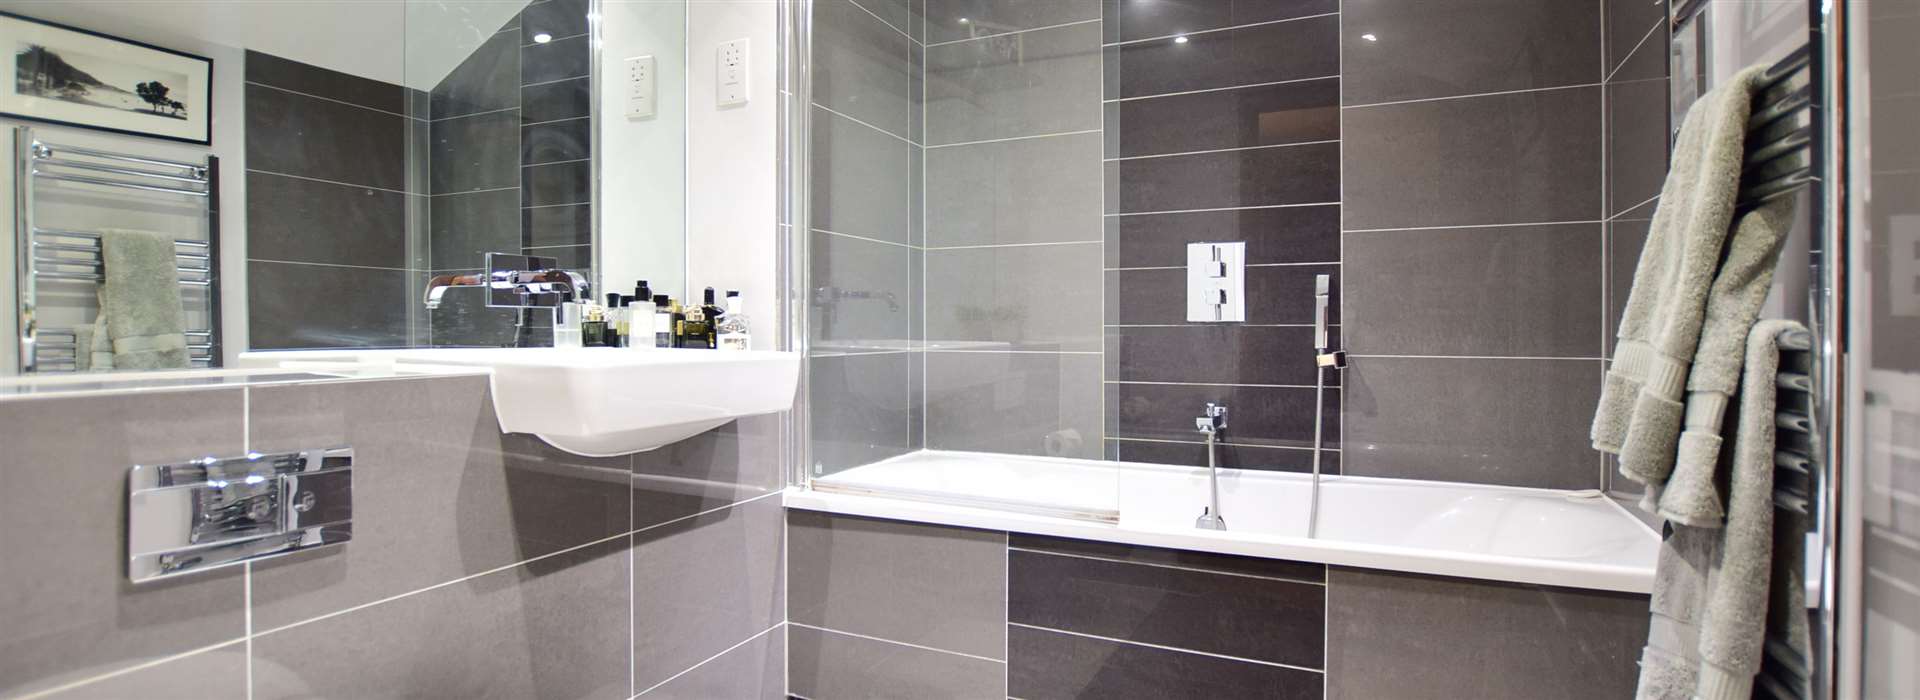 The contemporary bathroom is fully tiled